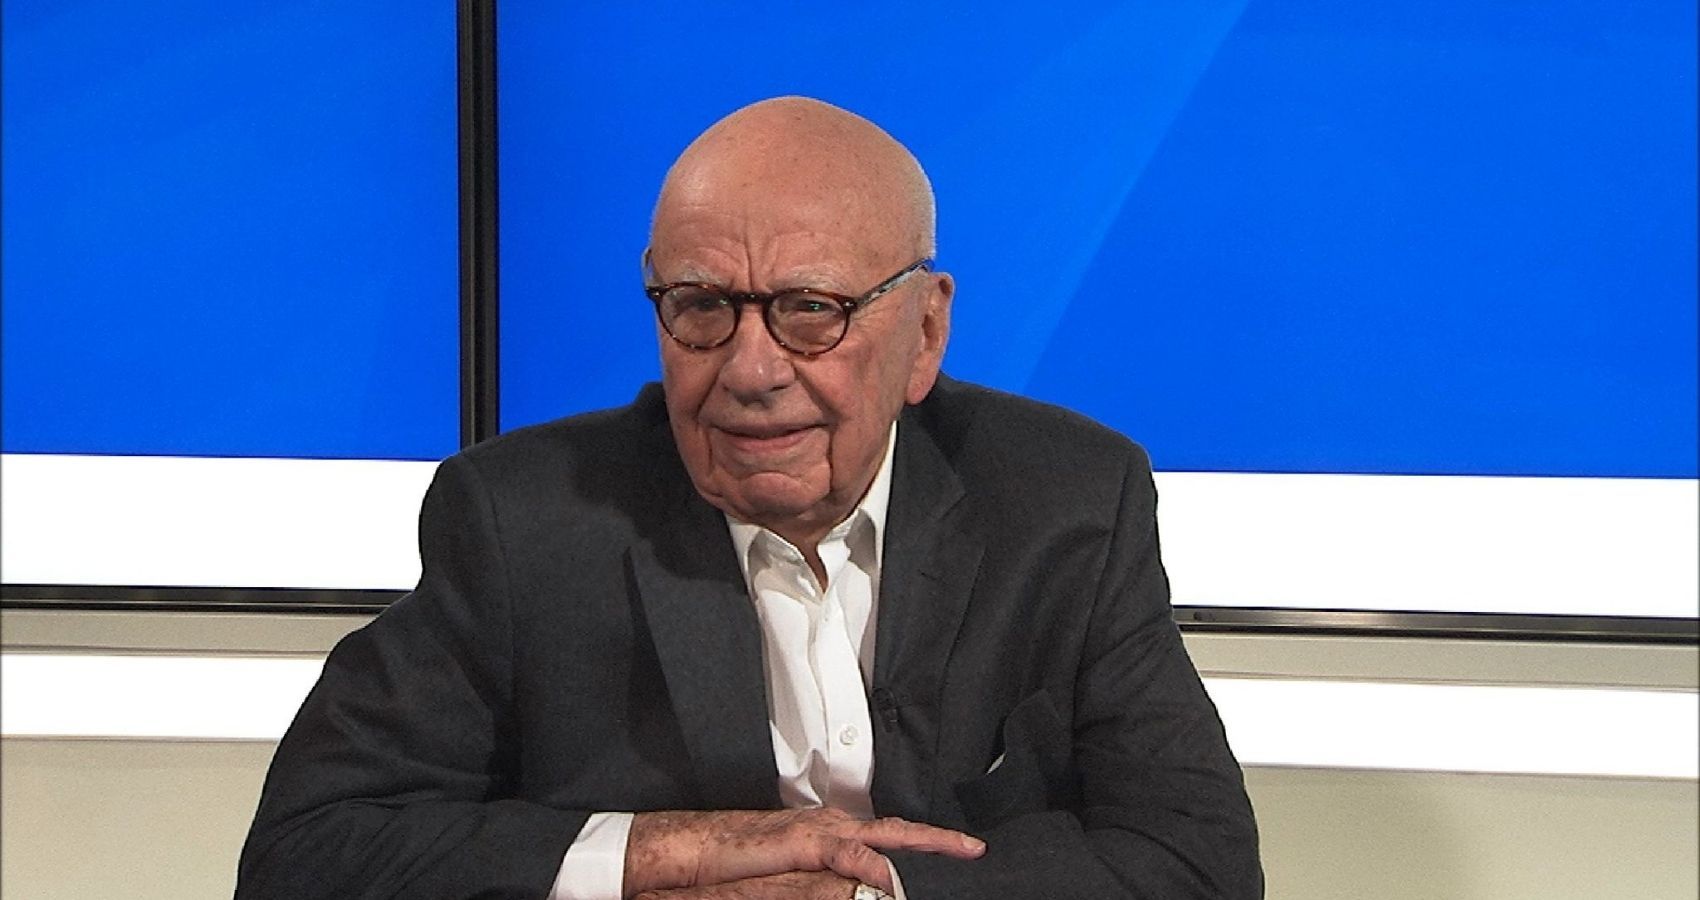 Rupert Murdoch Apparently Set Off Divorce By Emailing His Wife To Dump Him